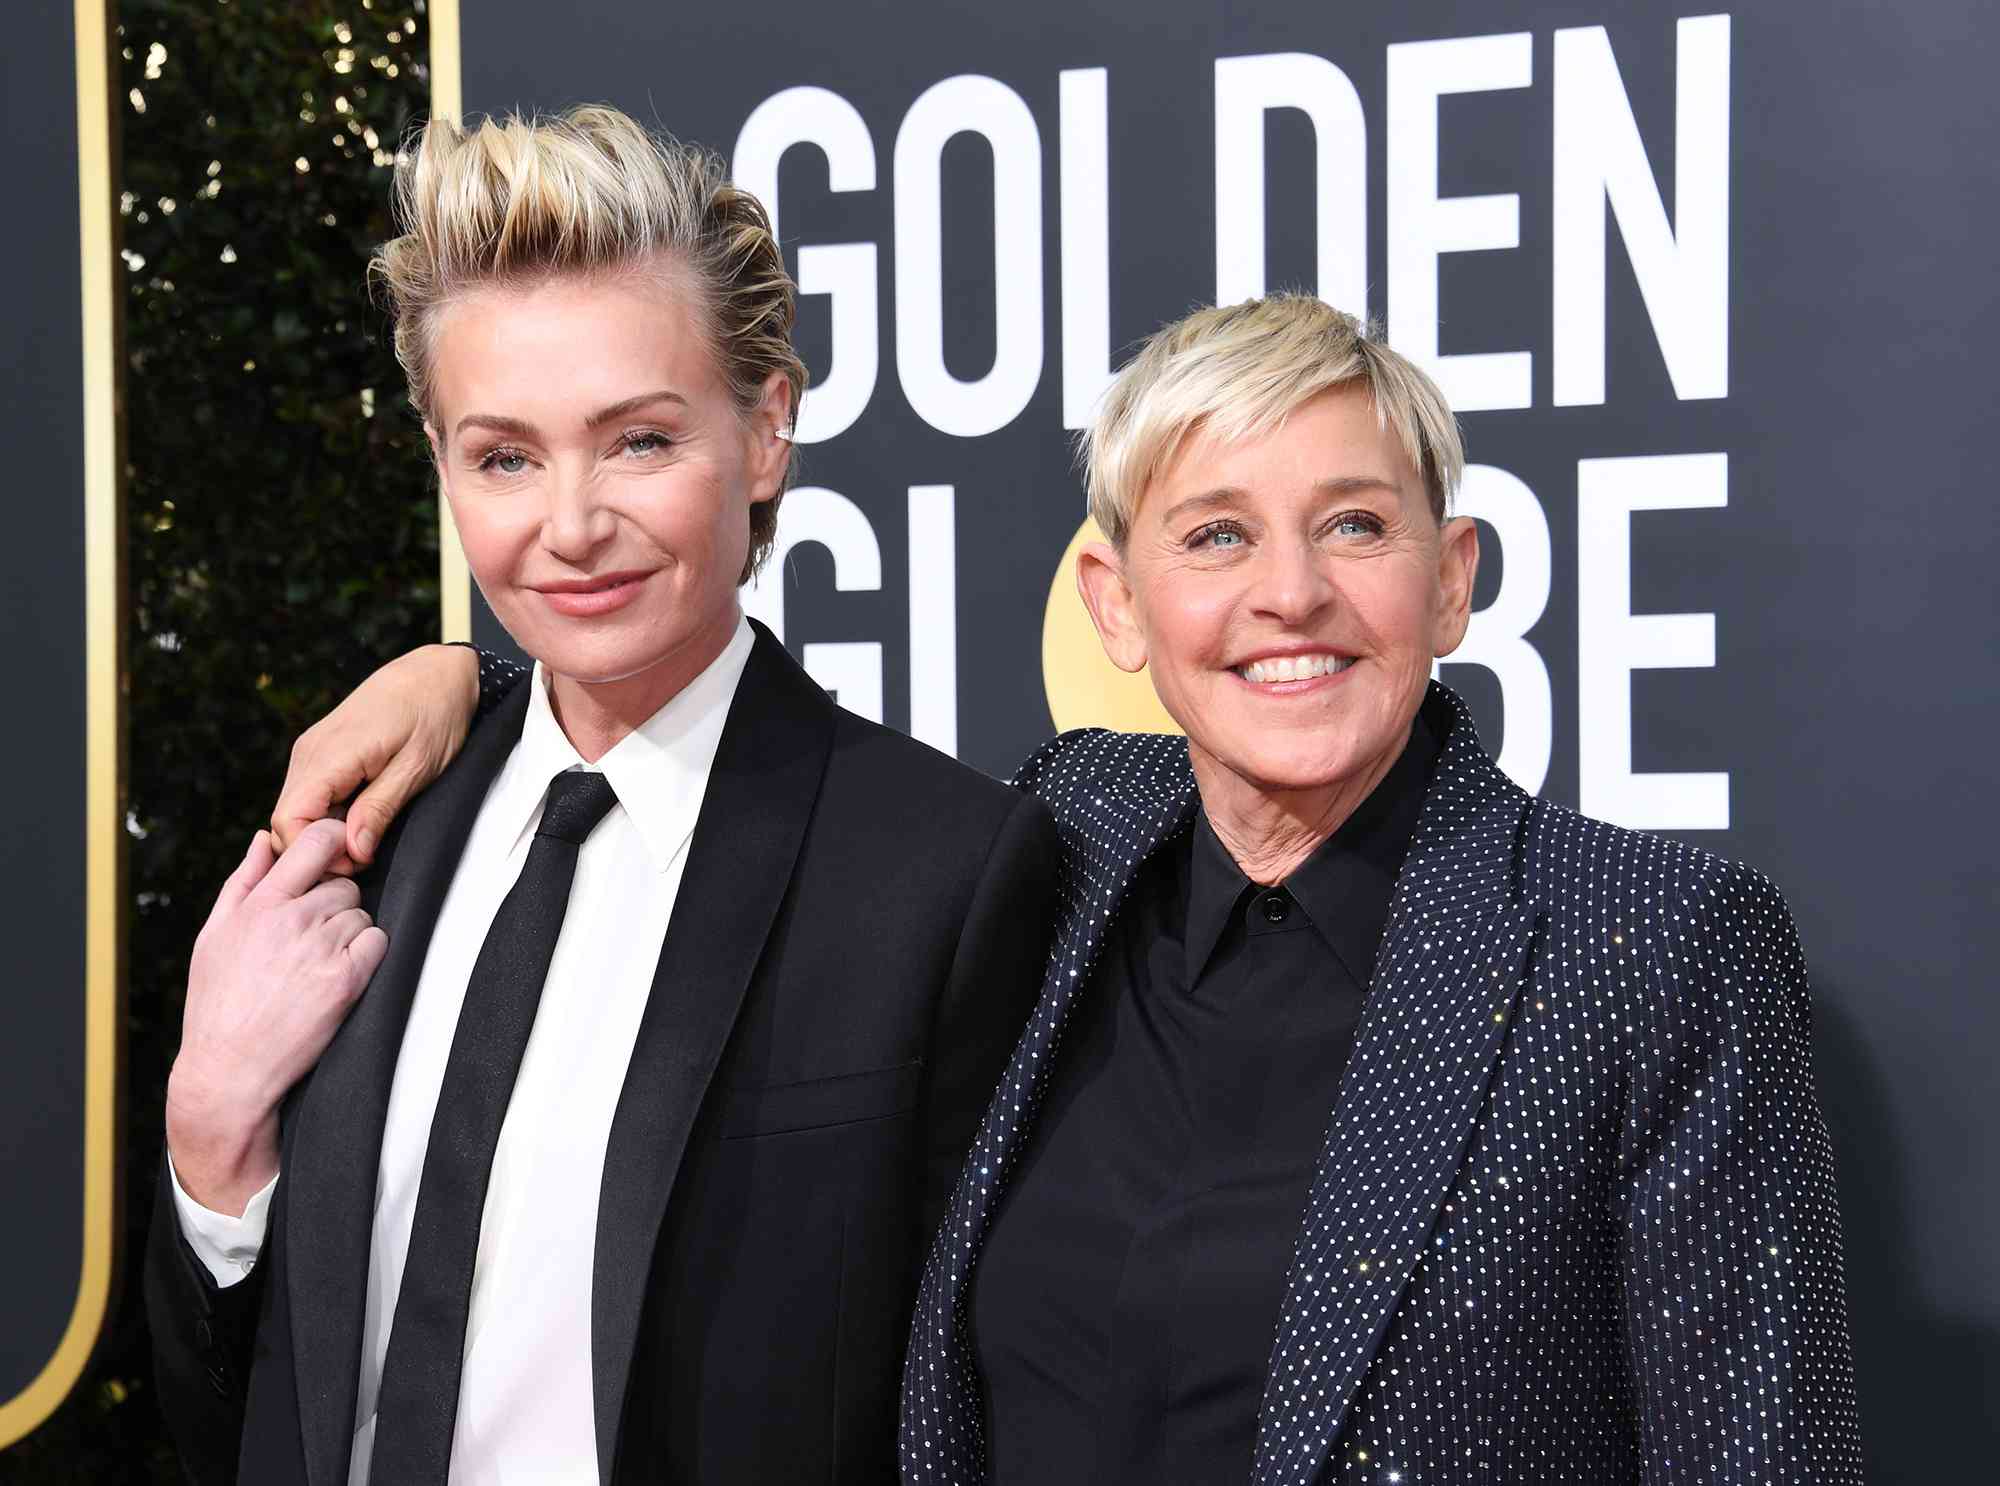 Portia de Rossi and Ellen DeGeneres attend the 77th Annual Golden Globe Awards at The Beverly Hilton Hotel on January 05, 2020 in Beverly Hills, California